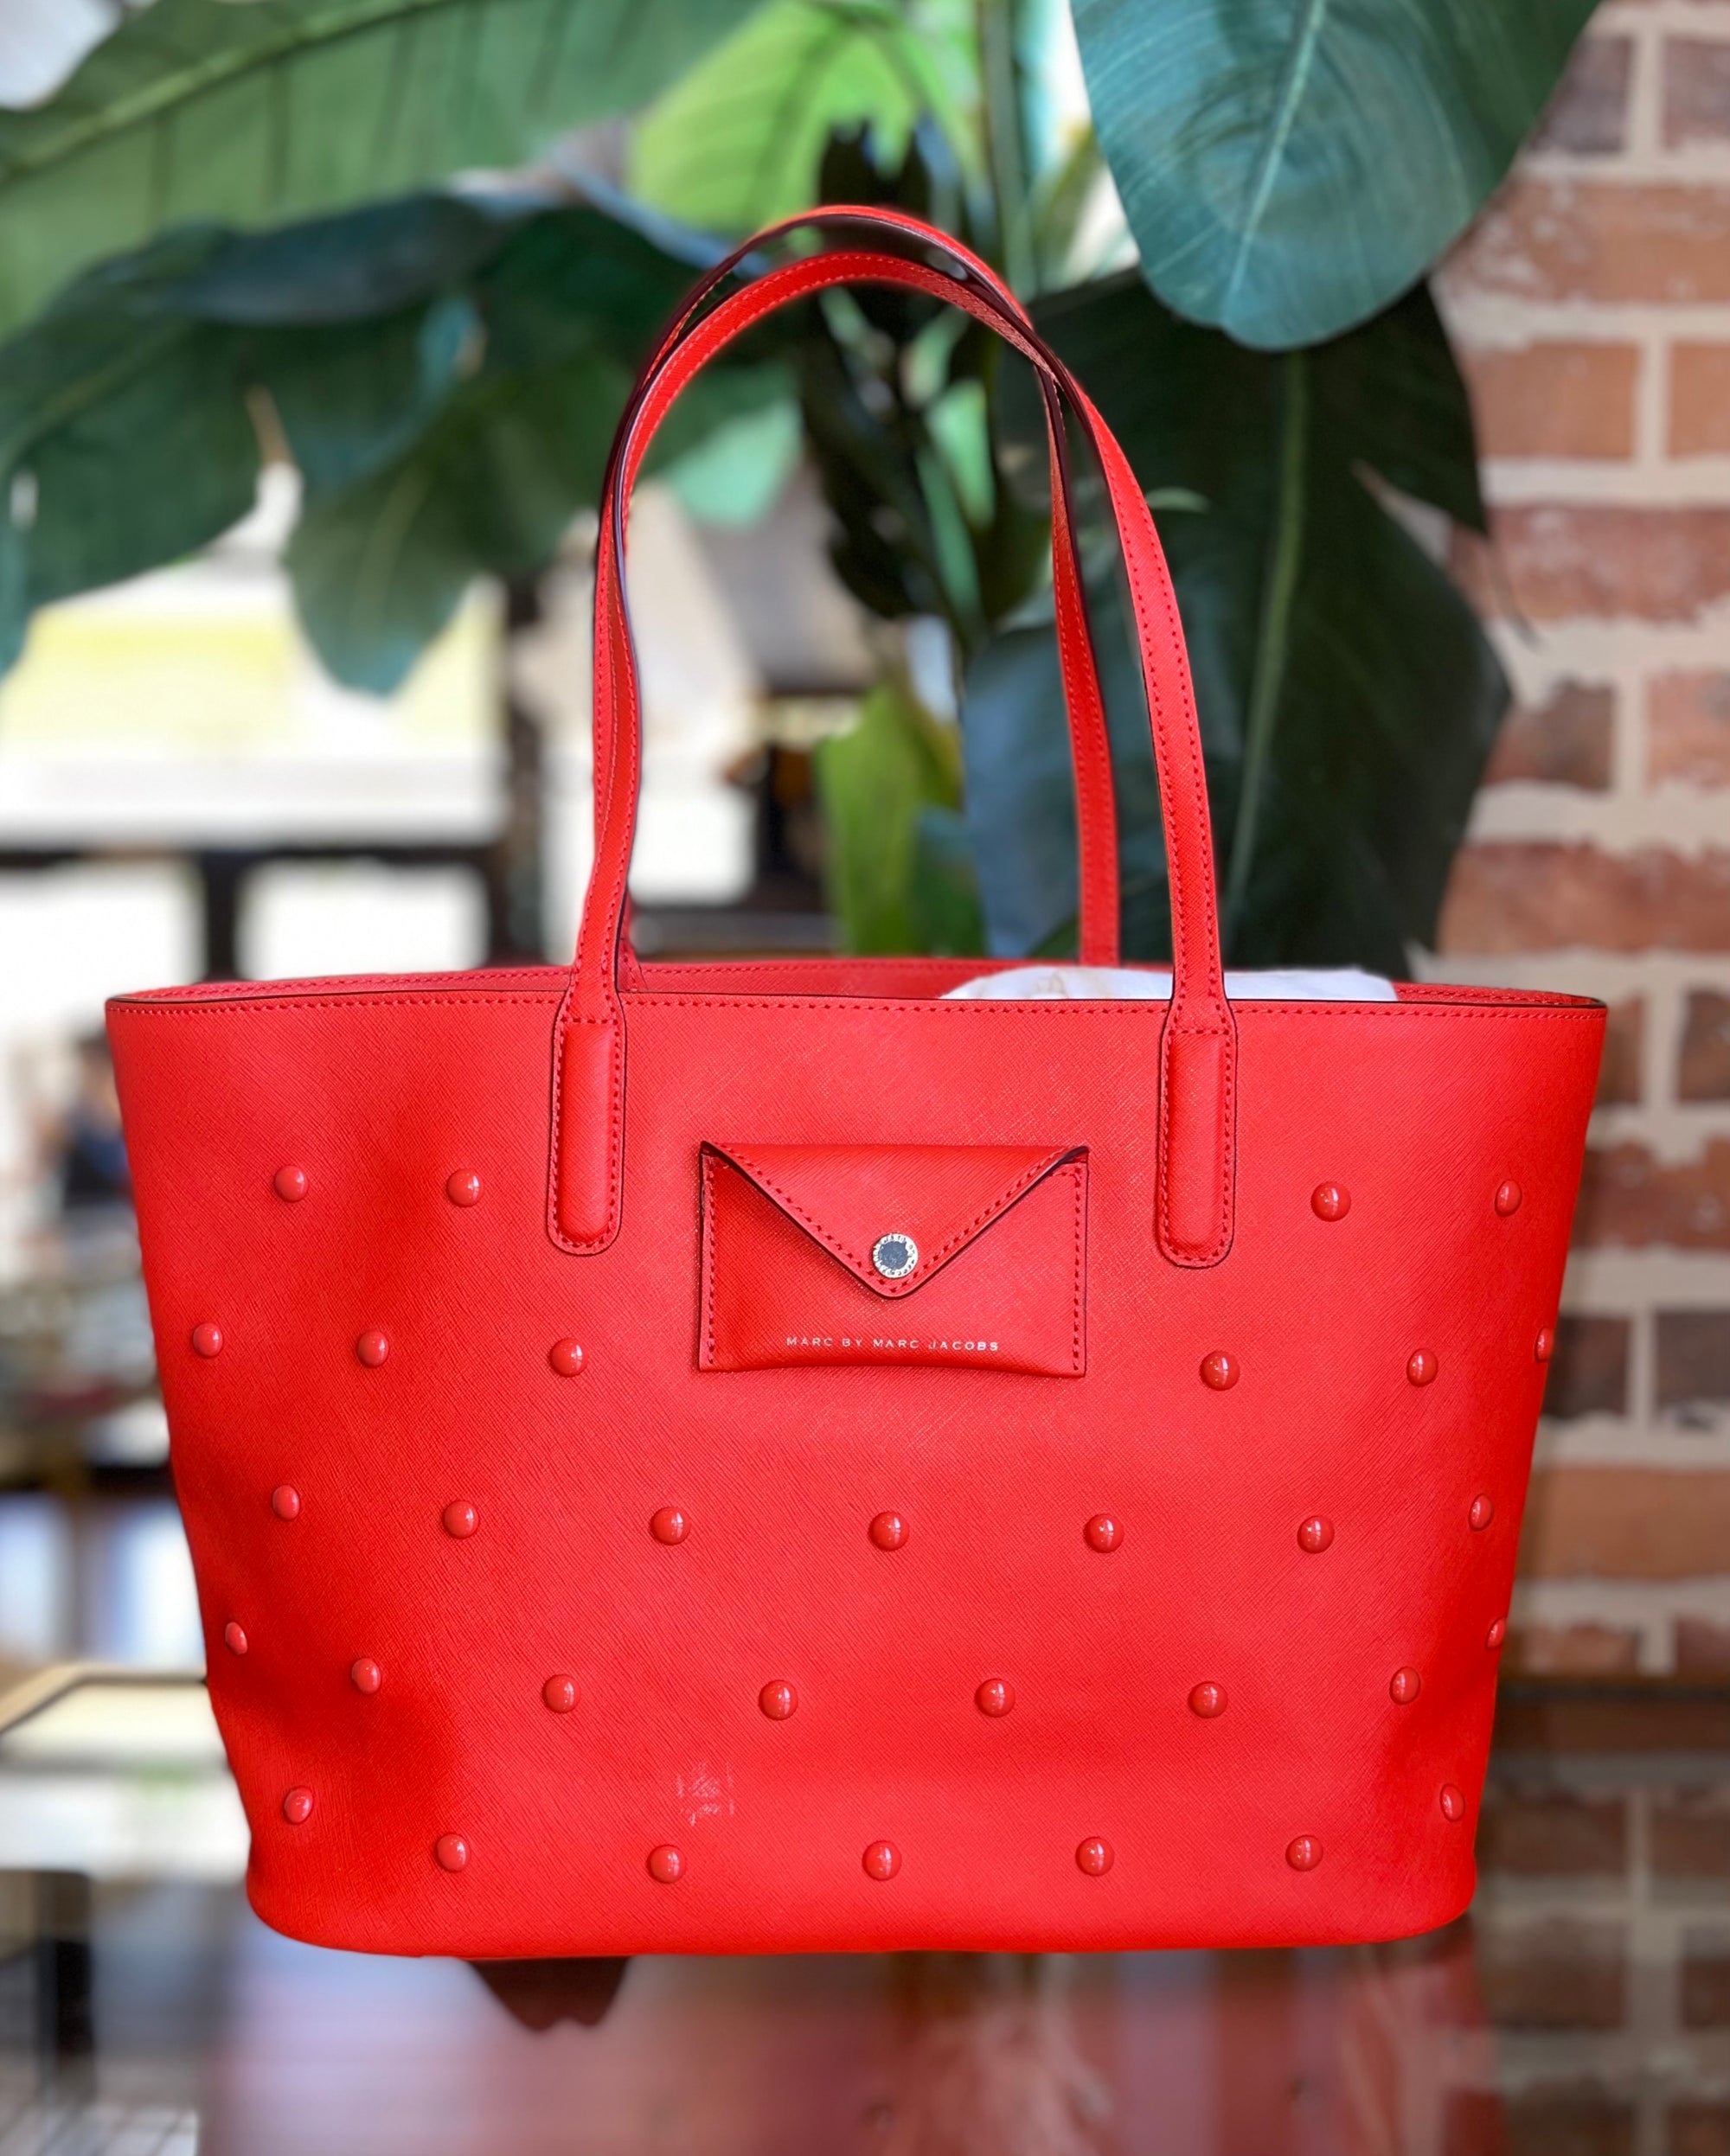 MARC BY MARC JACOBS Red Studded Tote